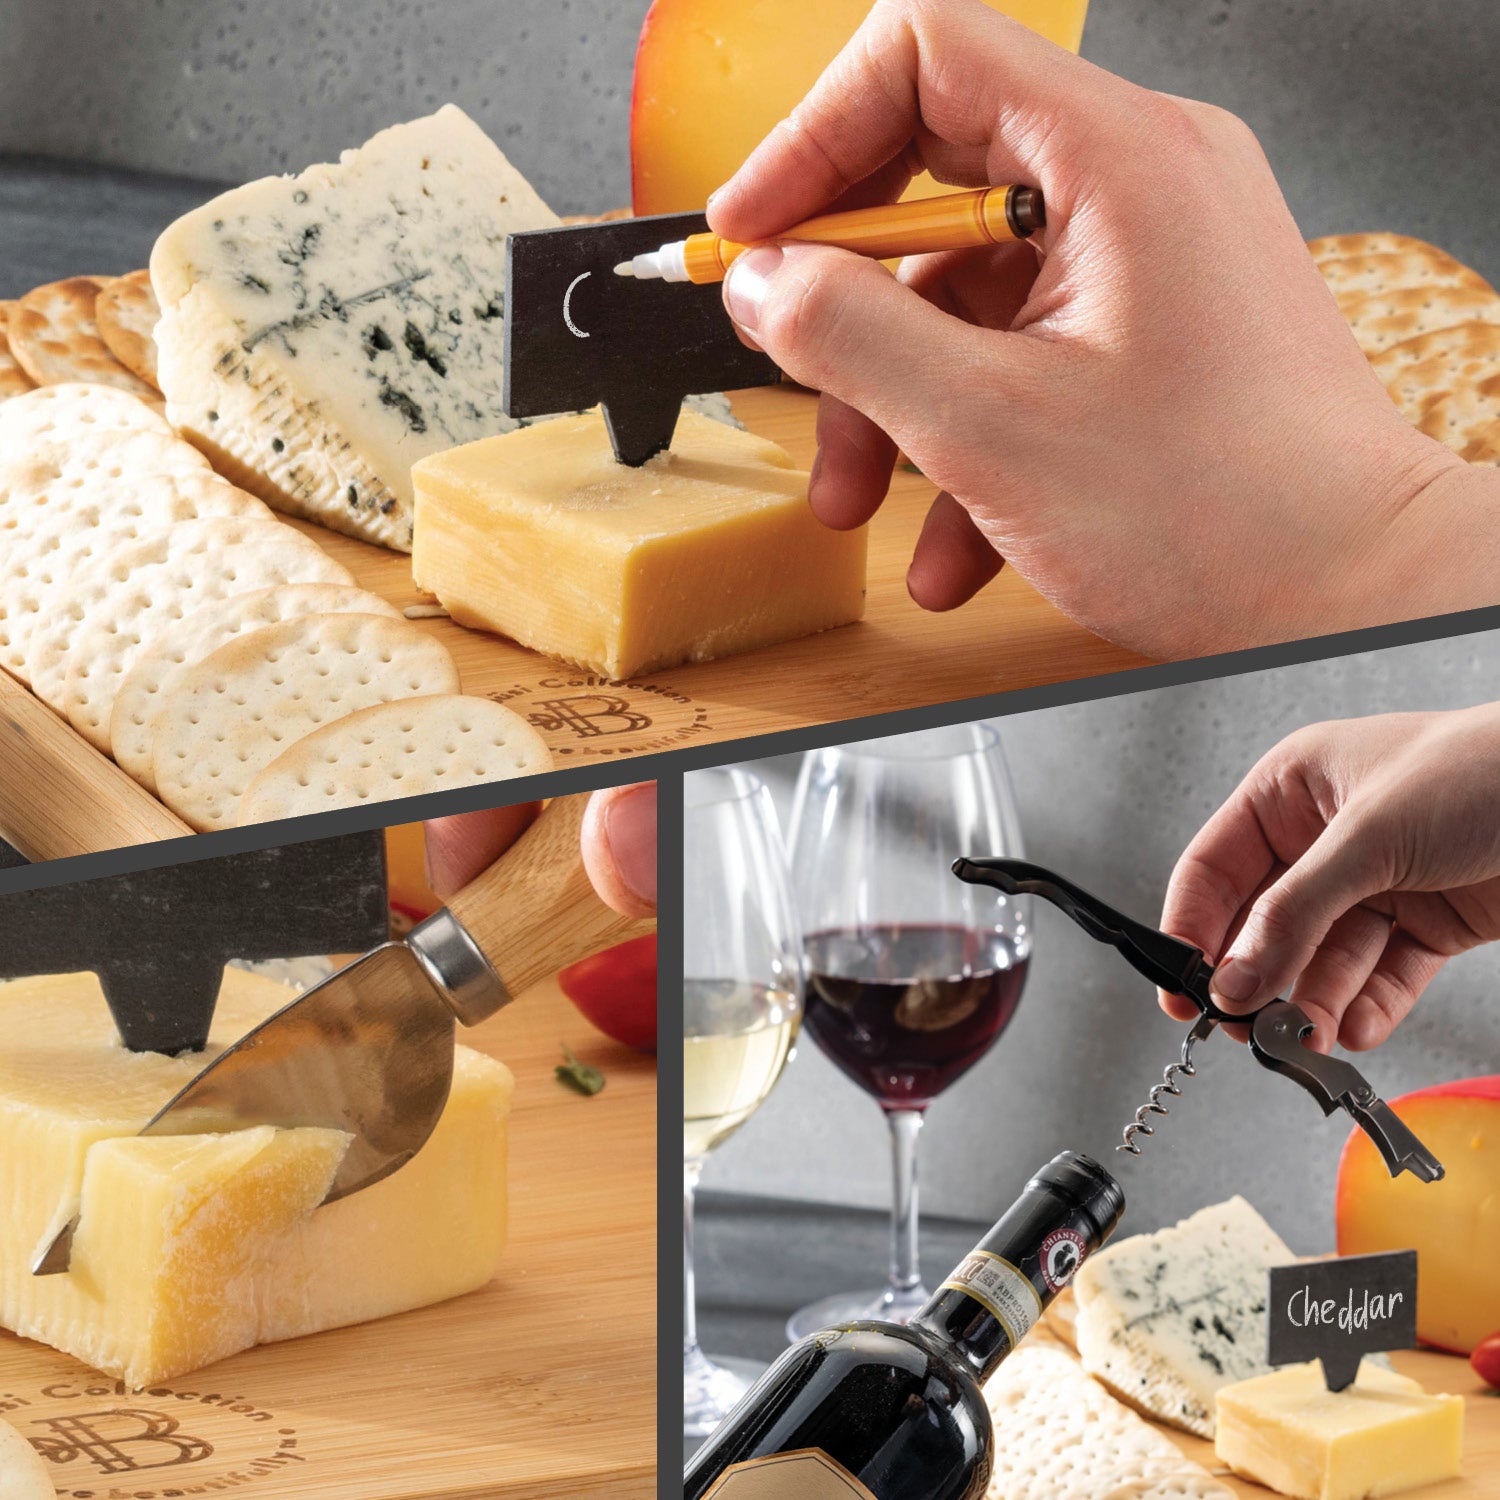 Personalized Charcuterie Board Set 19pcs Cheese Board and Knife